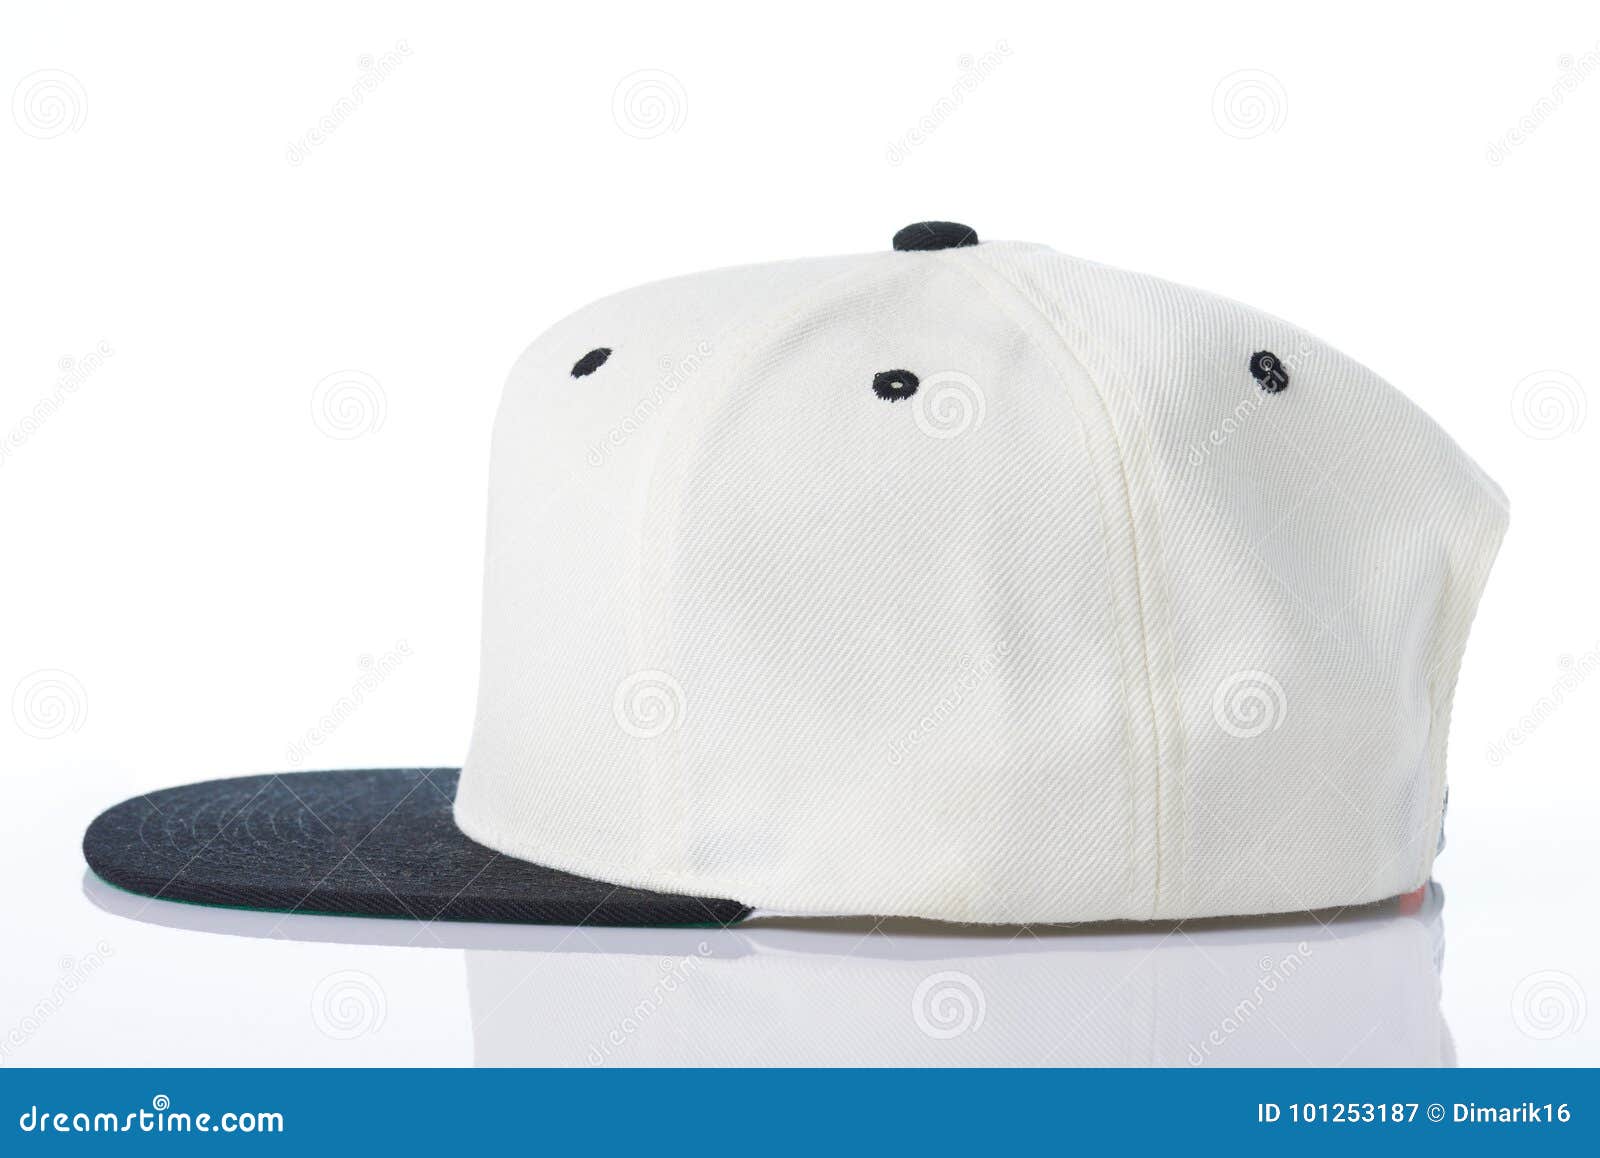 Profile View of White Baseball Cap Stock Image - Image of front, single ...